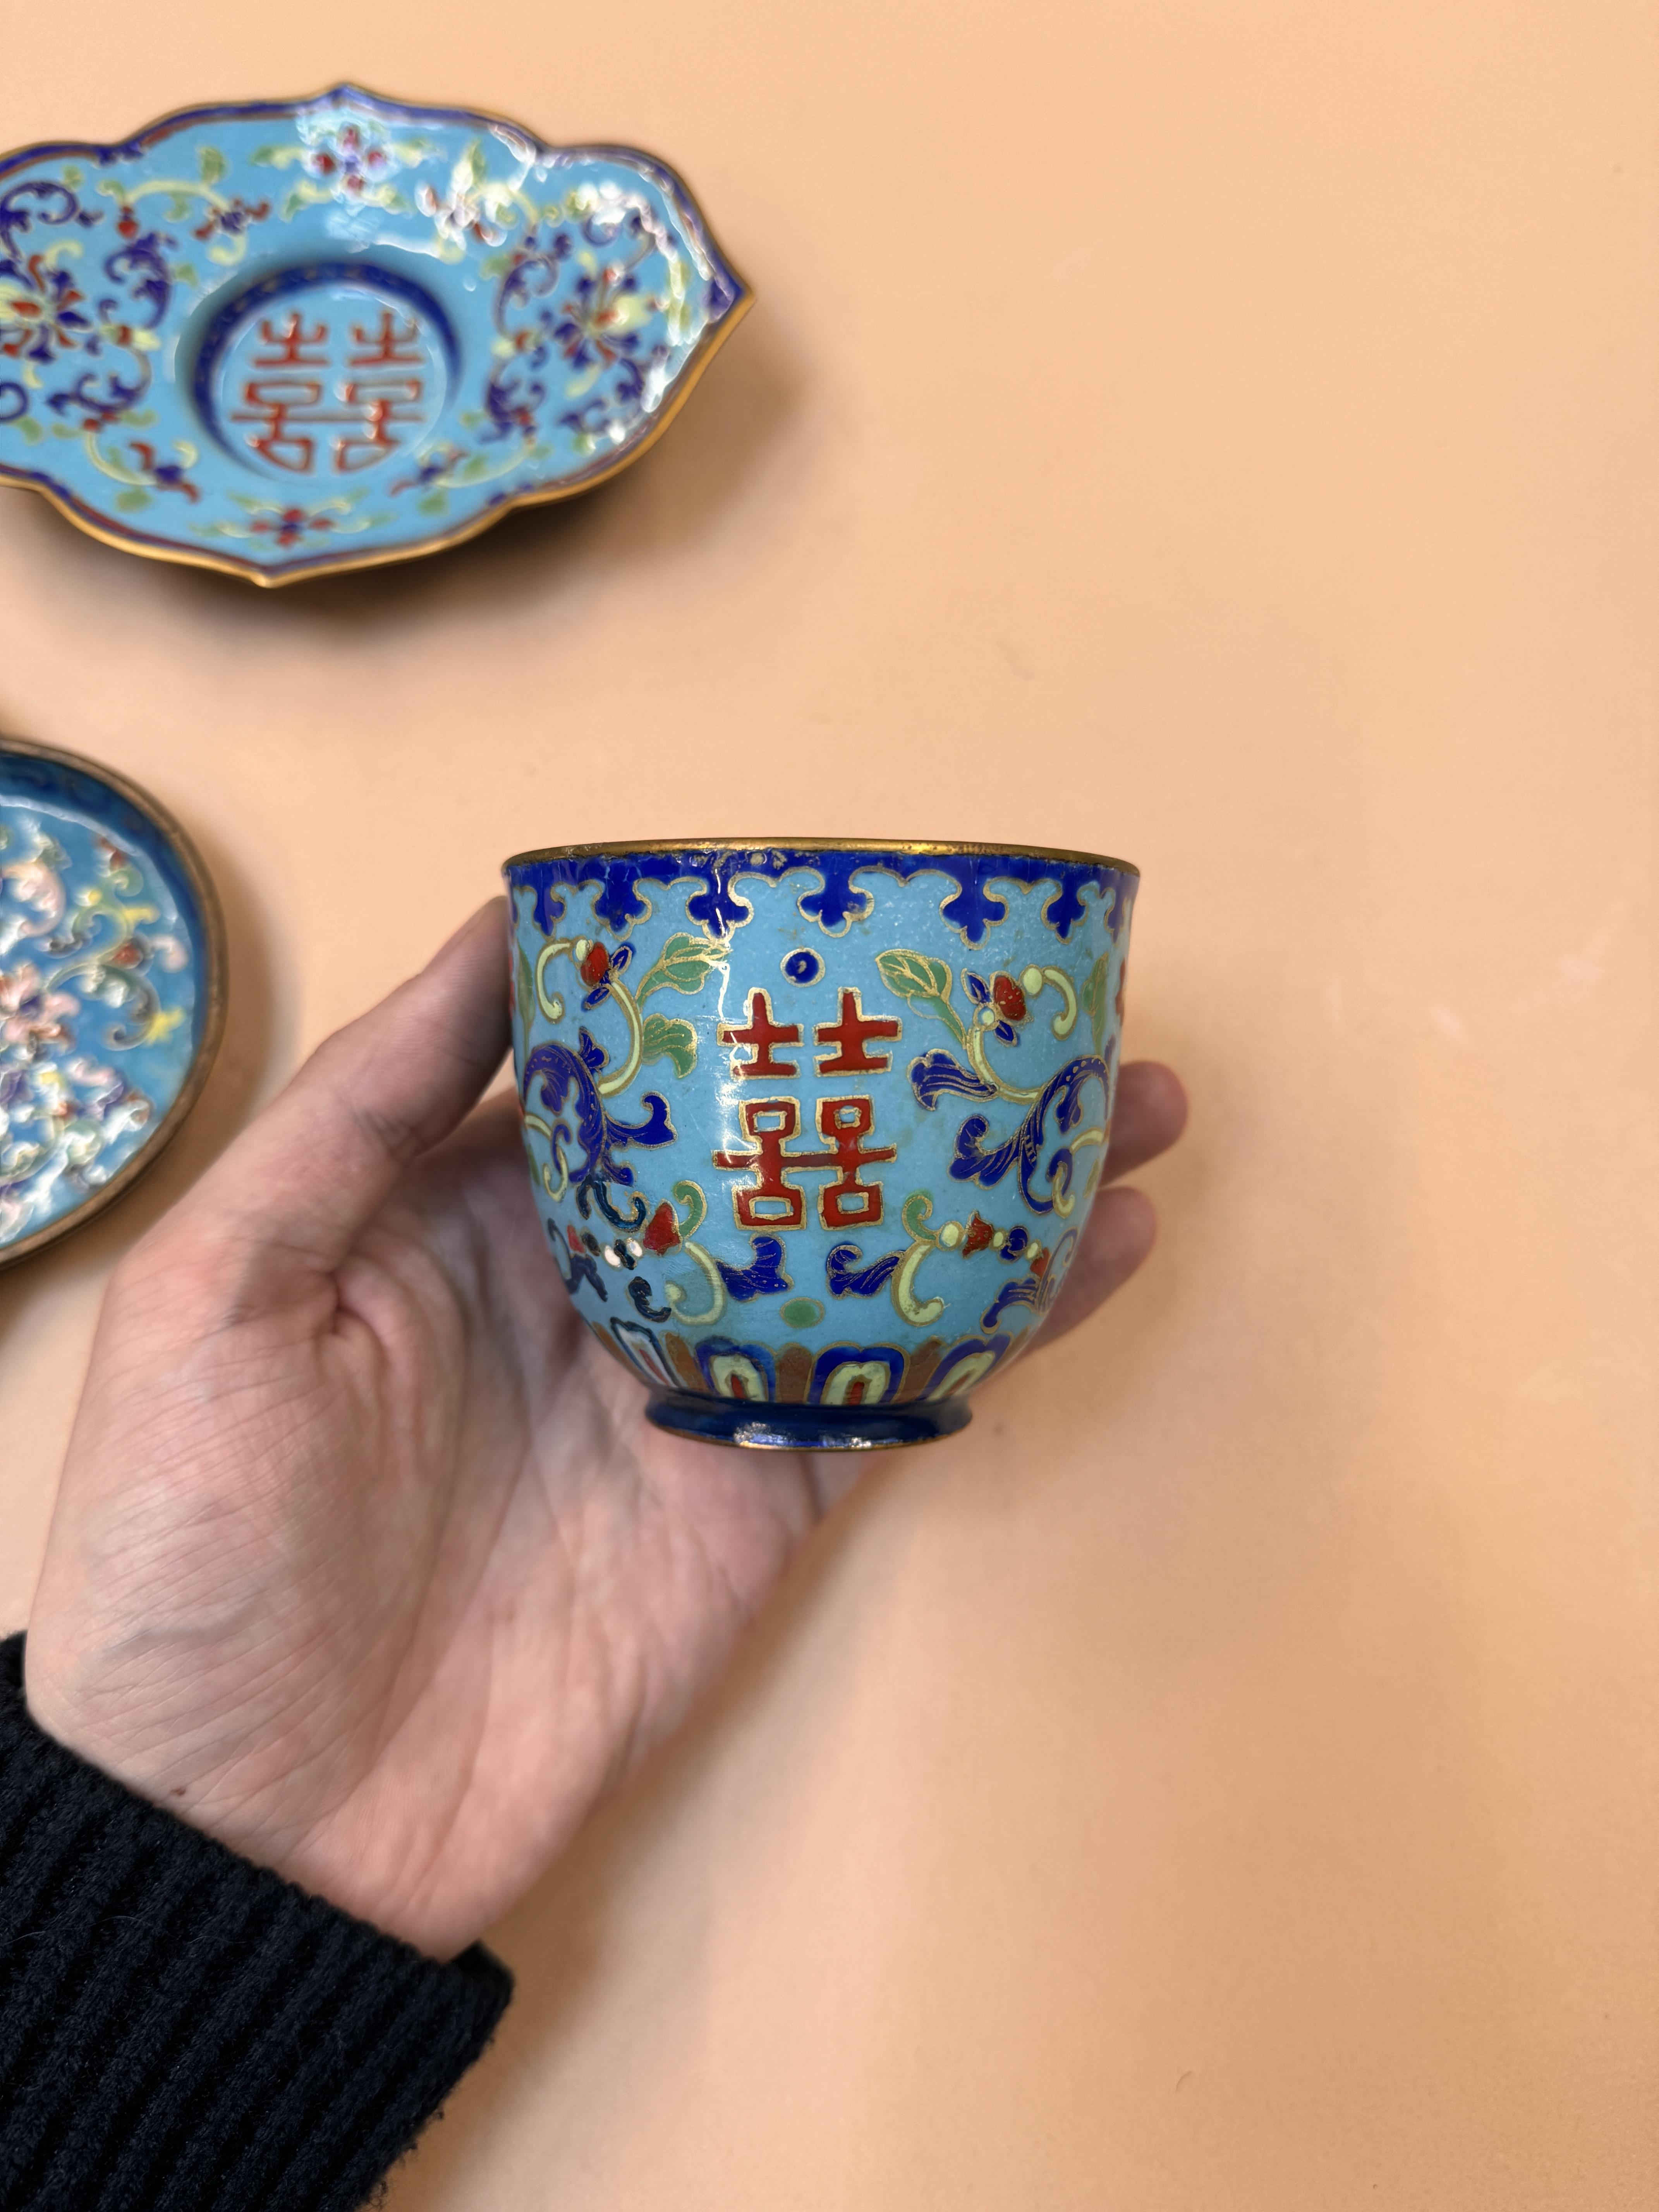 A CHINESE CANTON ENAMEL CUP, STAND AND DISH 清十九世紀 廣東銅胎畫琺瑯「壽」盤及「囍」盃及盤 - Image 26 of 31